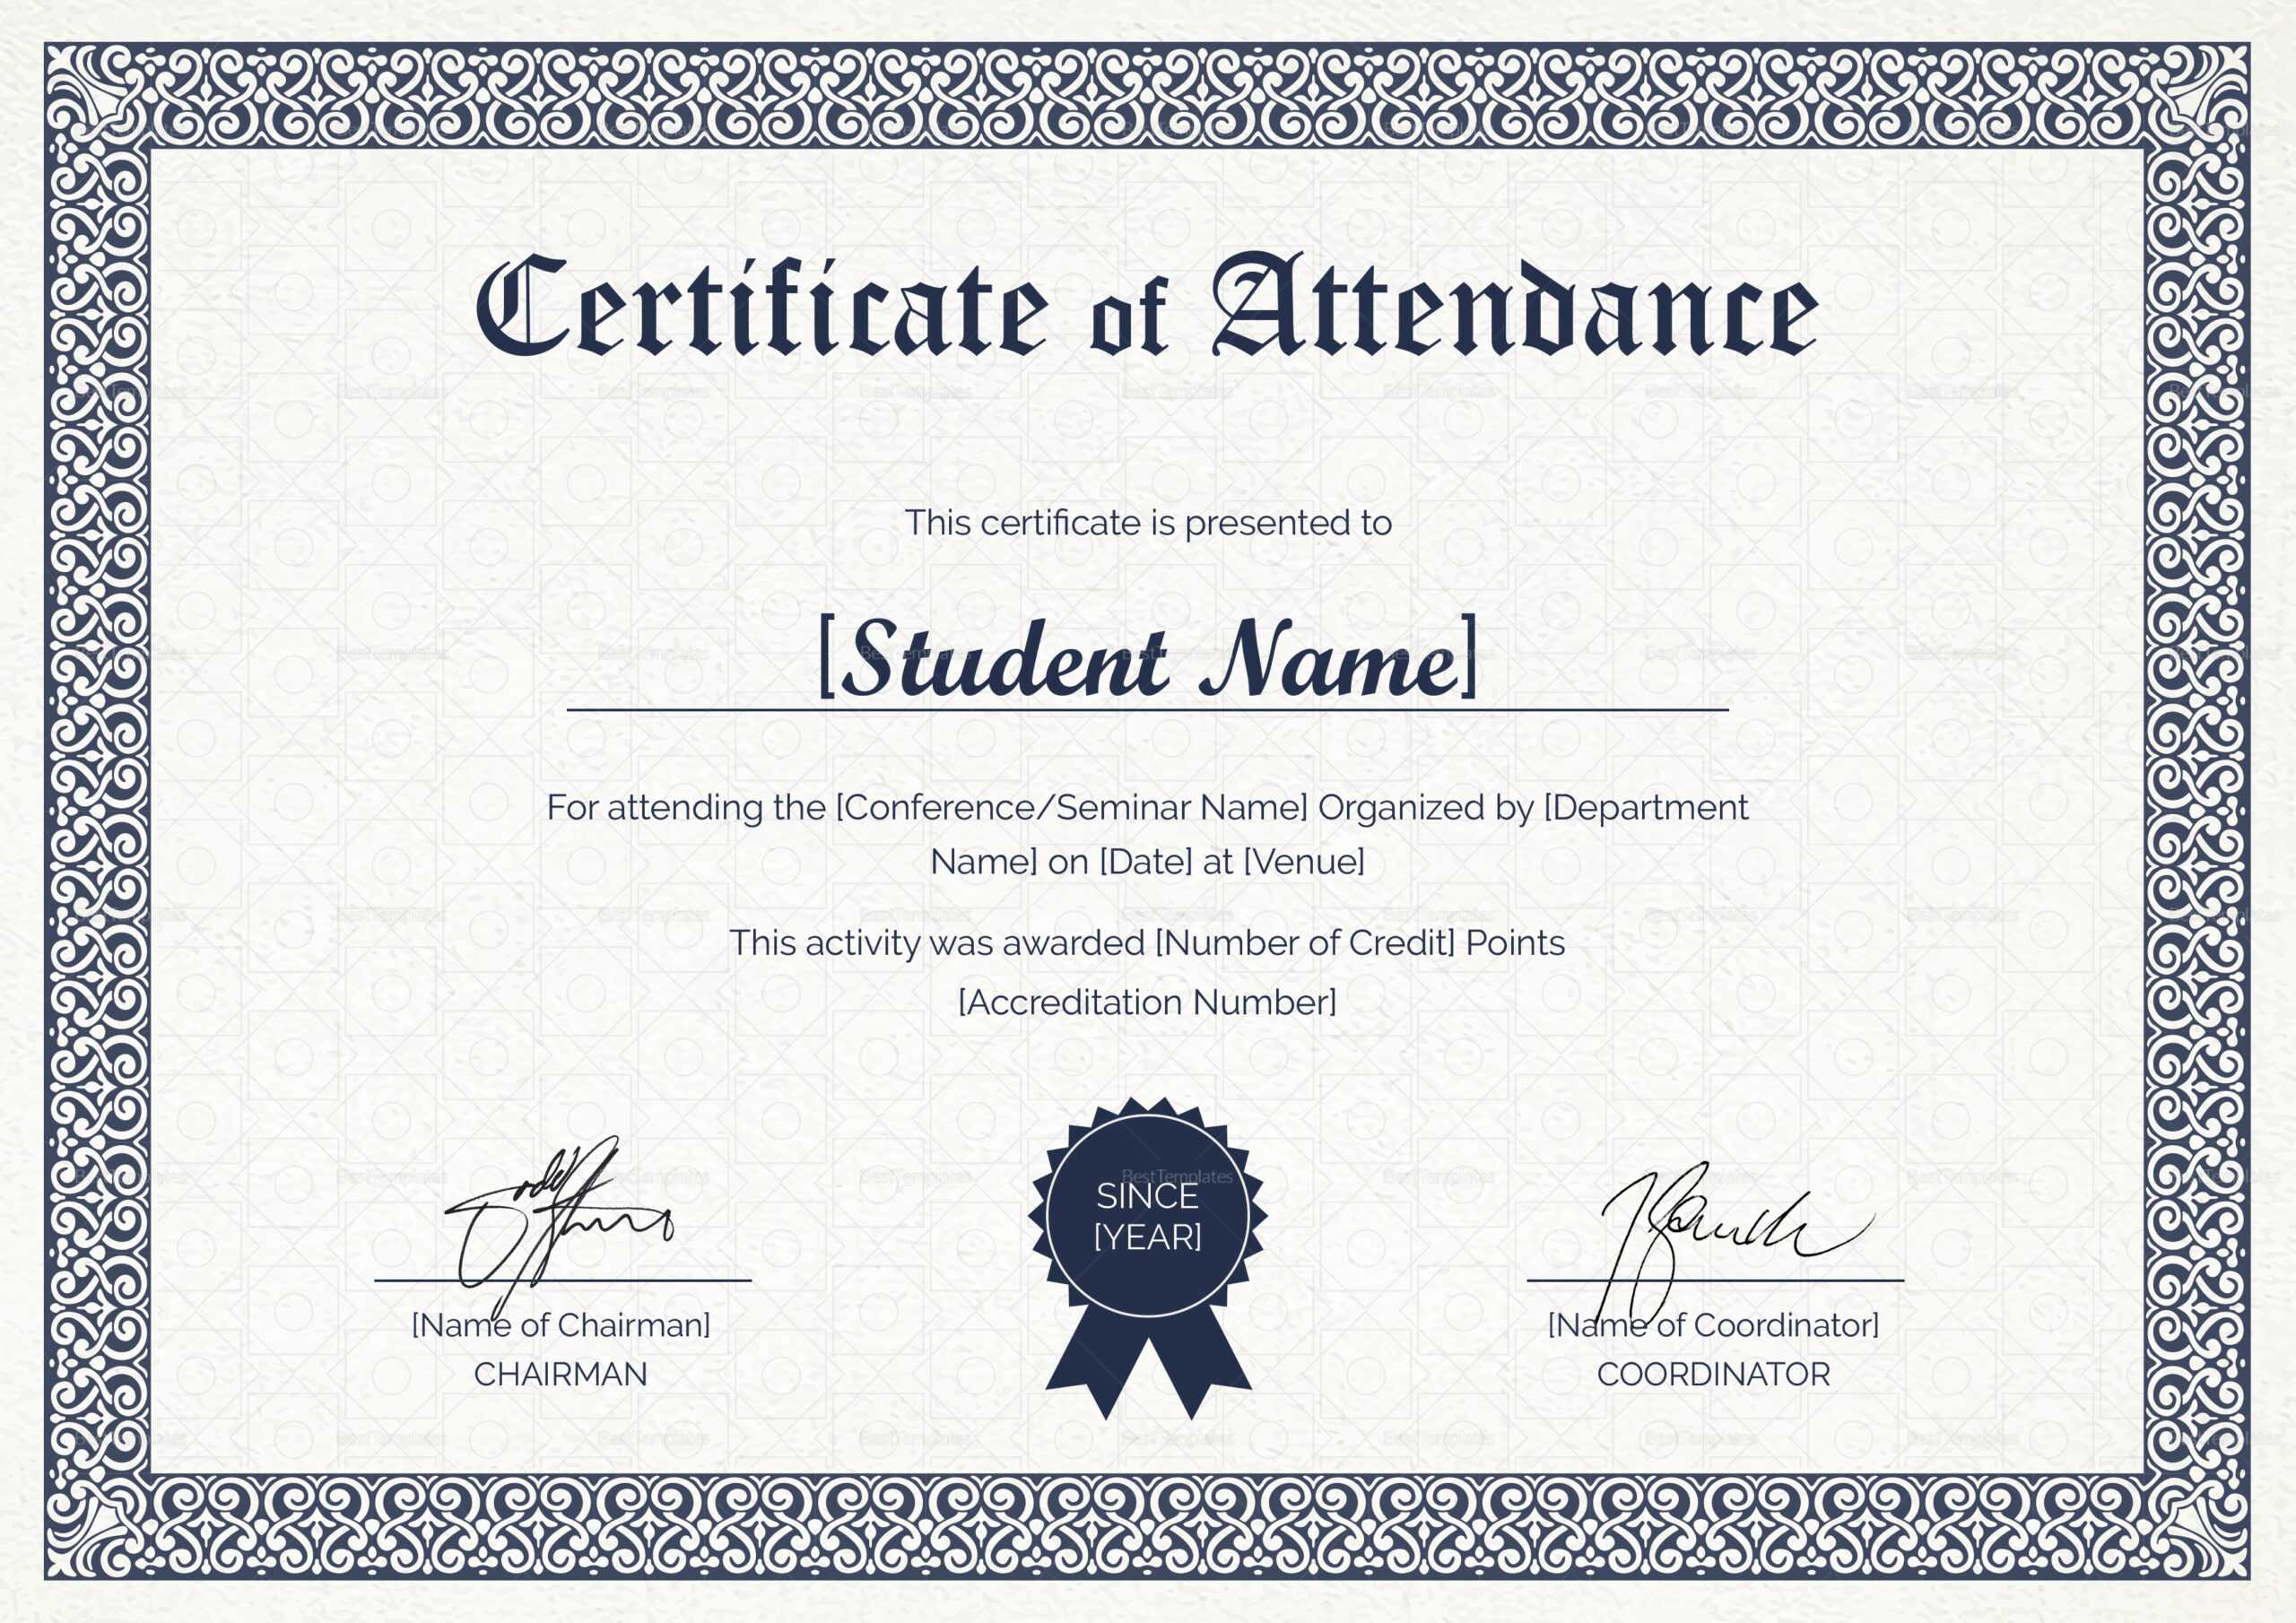 Students Attendance Certificate Template In Conference Certificate Of Attendance Template